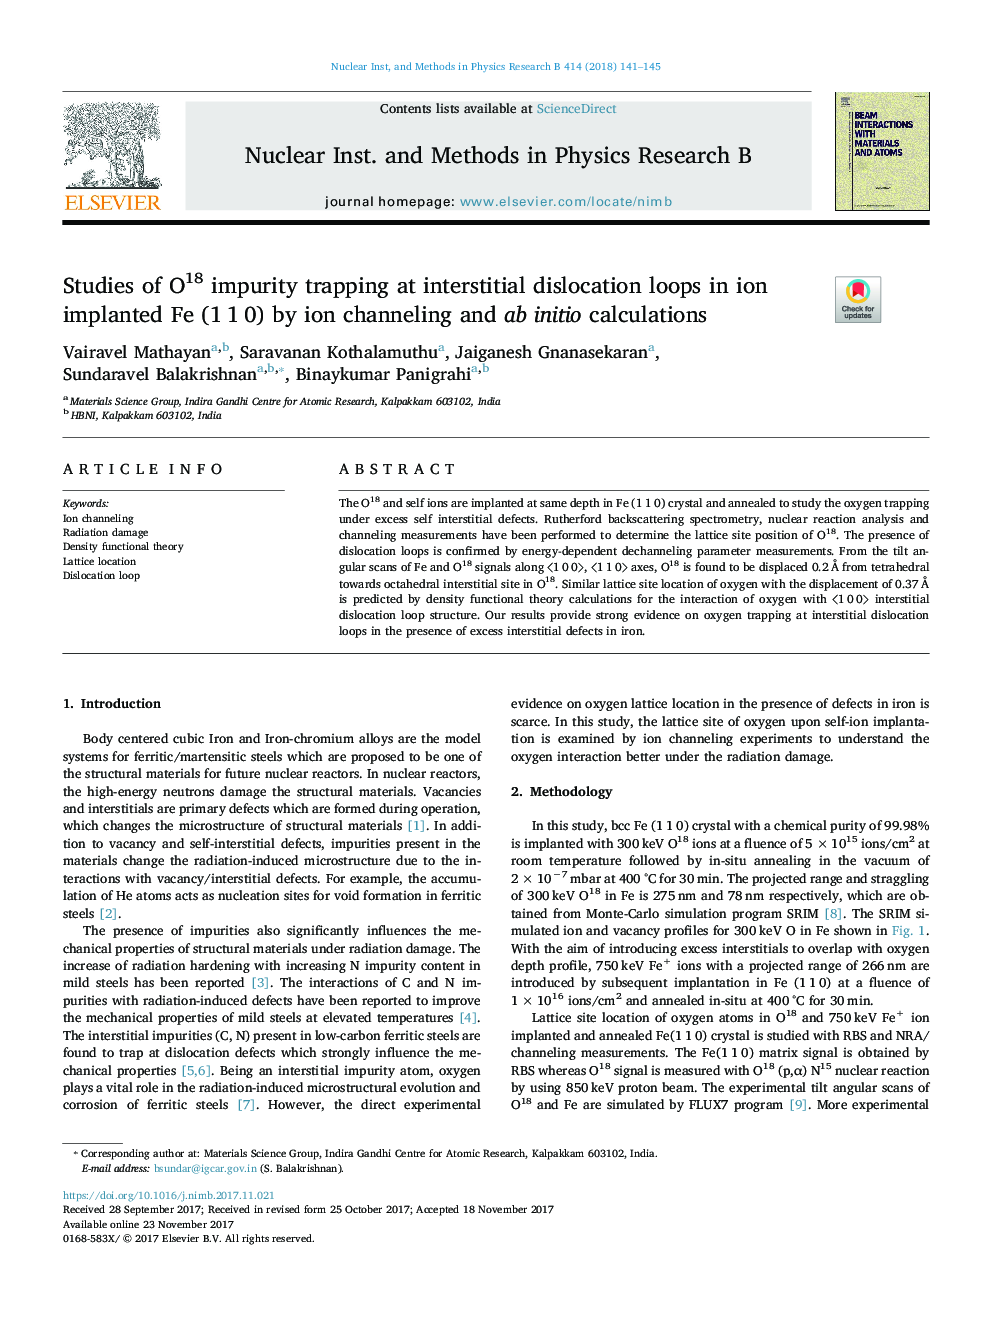 Studies of O18 impurity trapping at interstitial dislocation loops in ion implanted Fe (1â¯1â¯0) by ion channeling and ab initio calculations